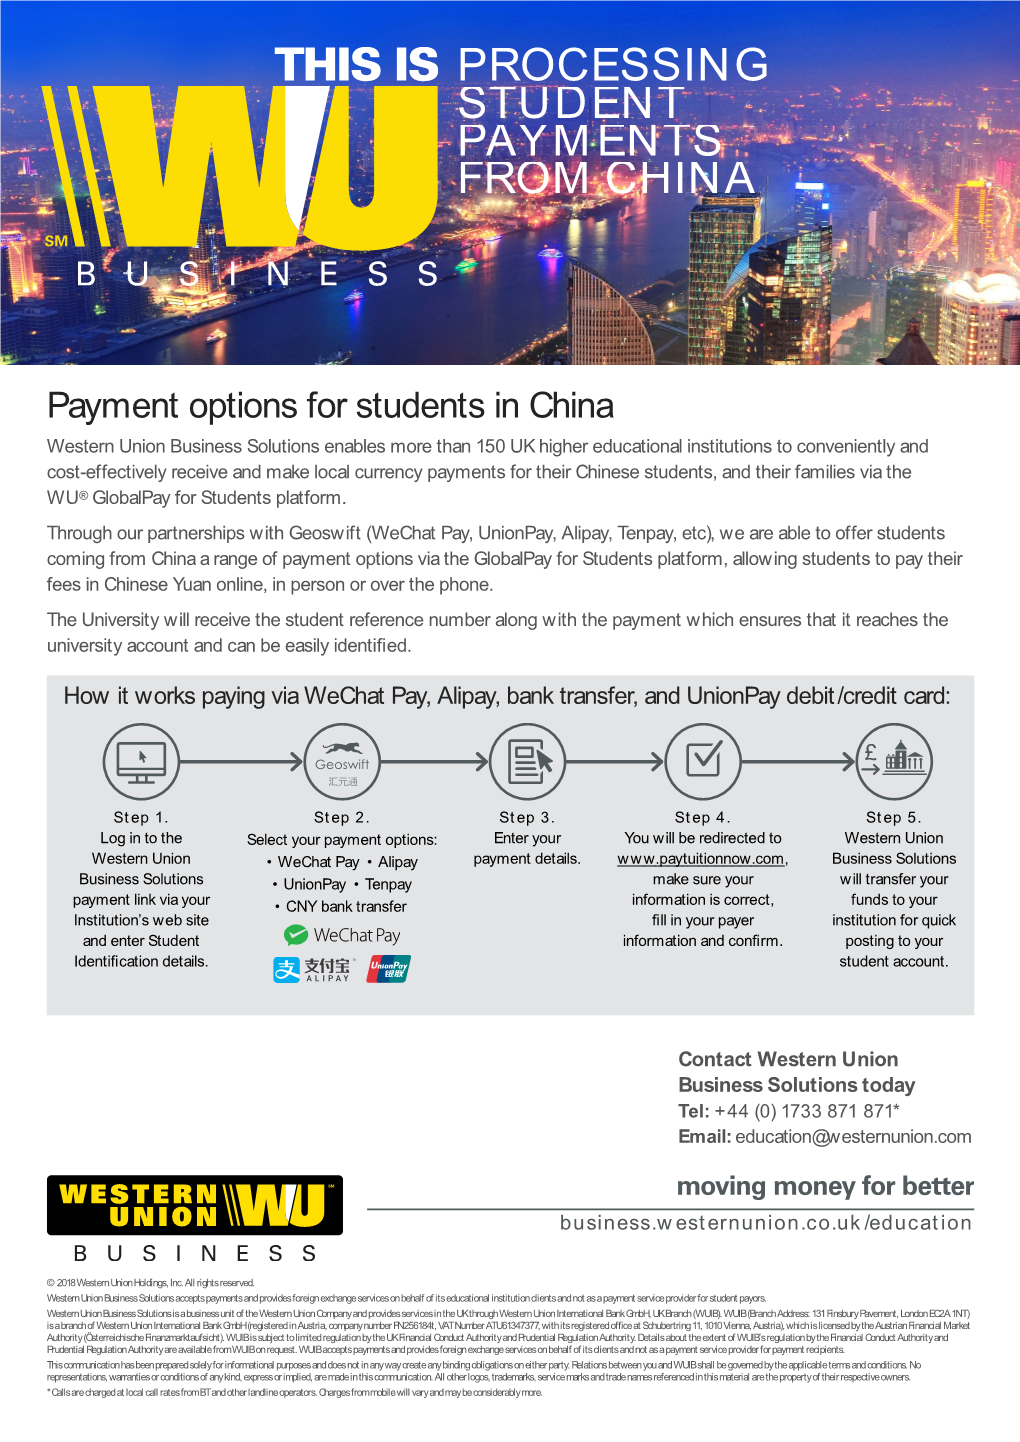 Processing Student Paym Ents from China